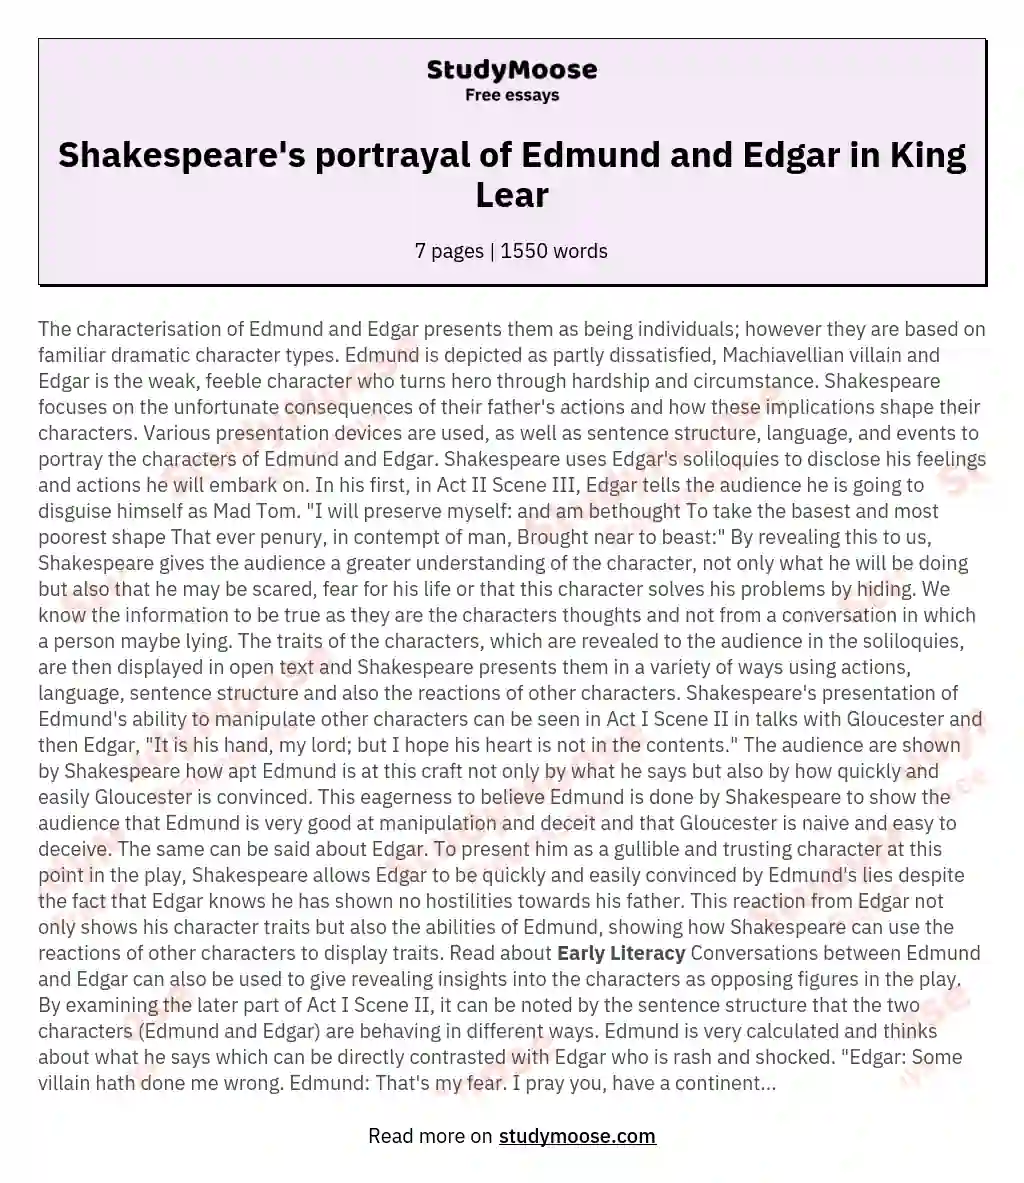 Explore the ways in which Shakespeare presents the characters of Edmund and Edgar in "King Lear"